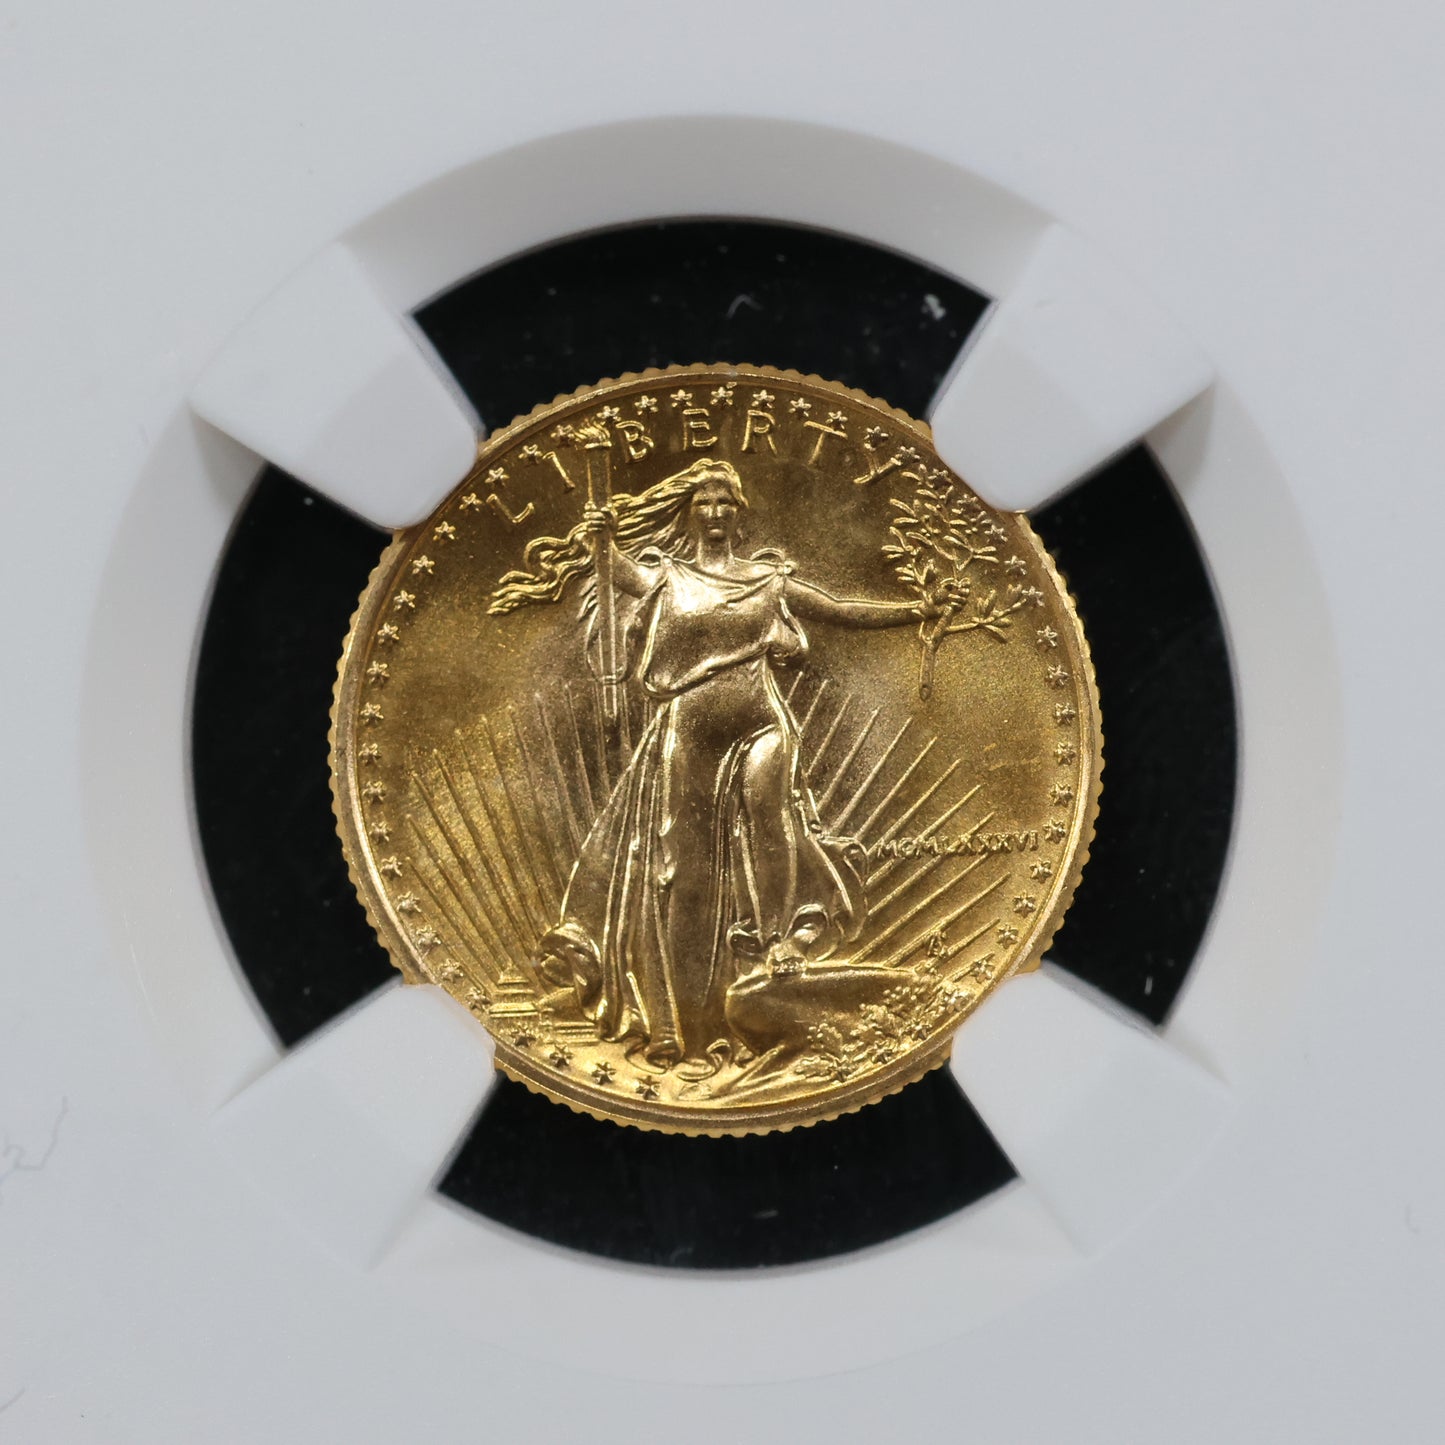 1986 1/10 oz Gold American Eagle 5$ Bullion Gold Coin - NGC MS 69